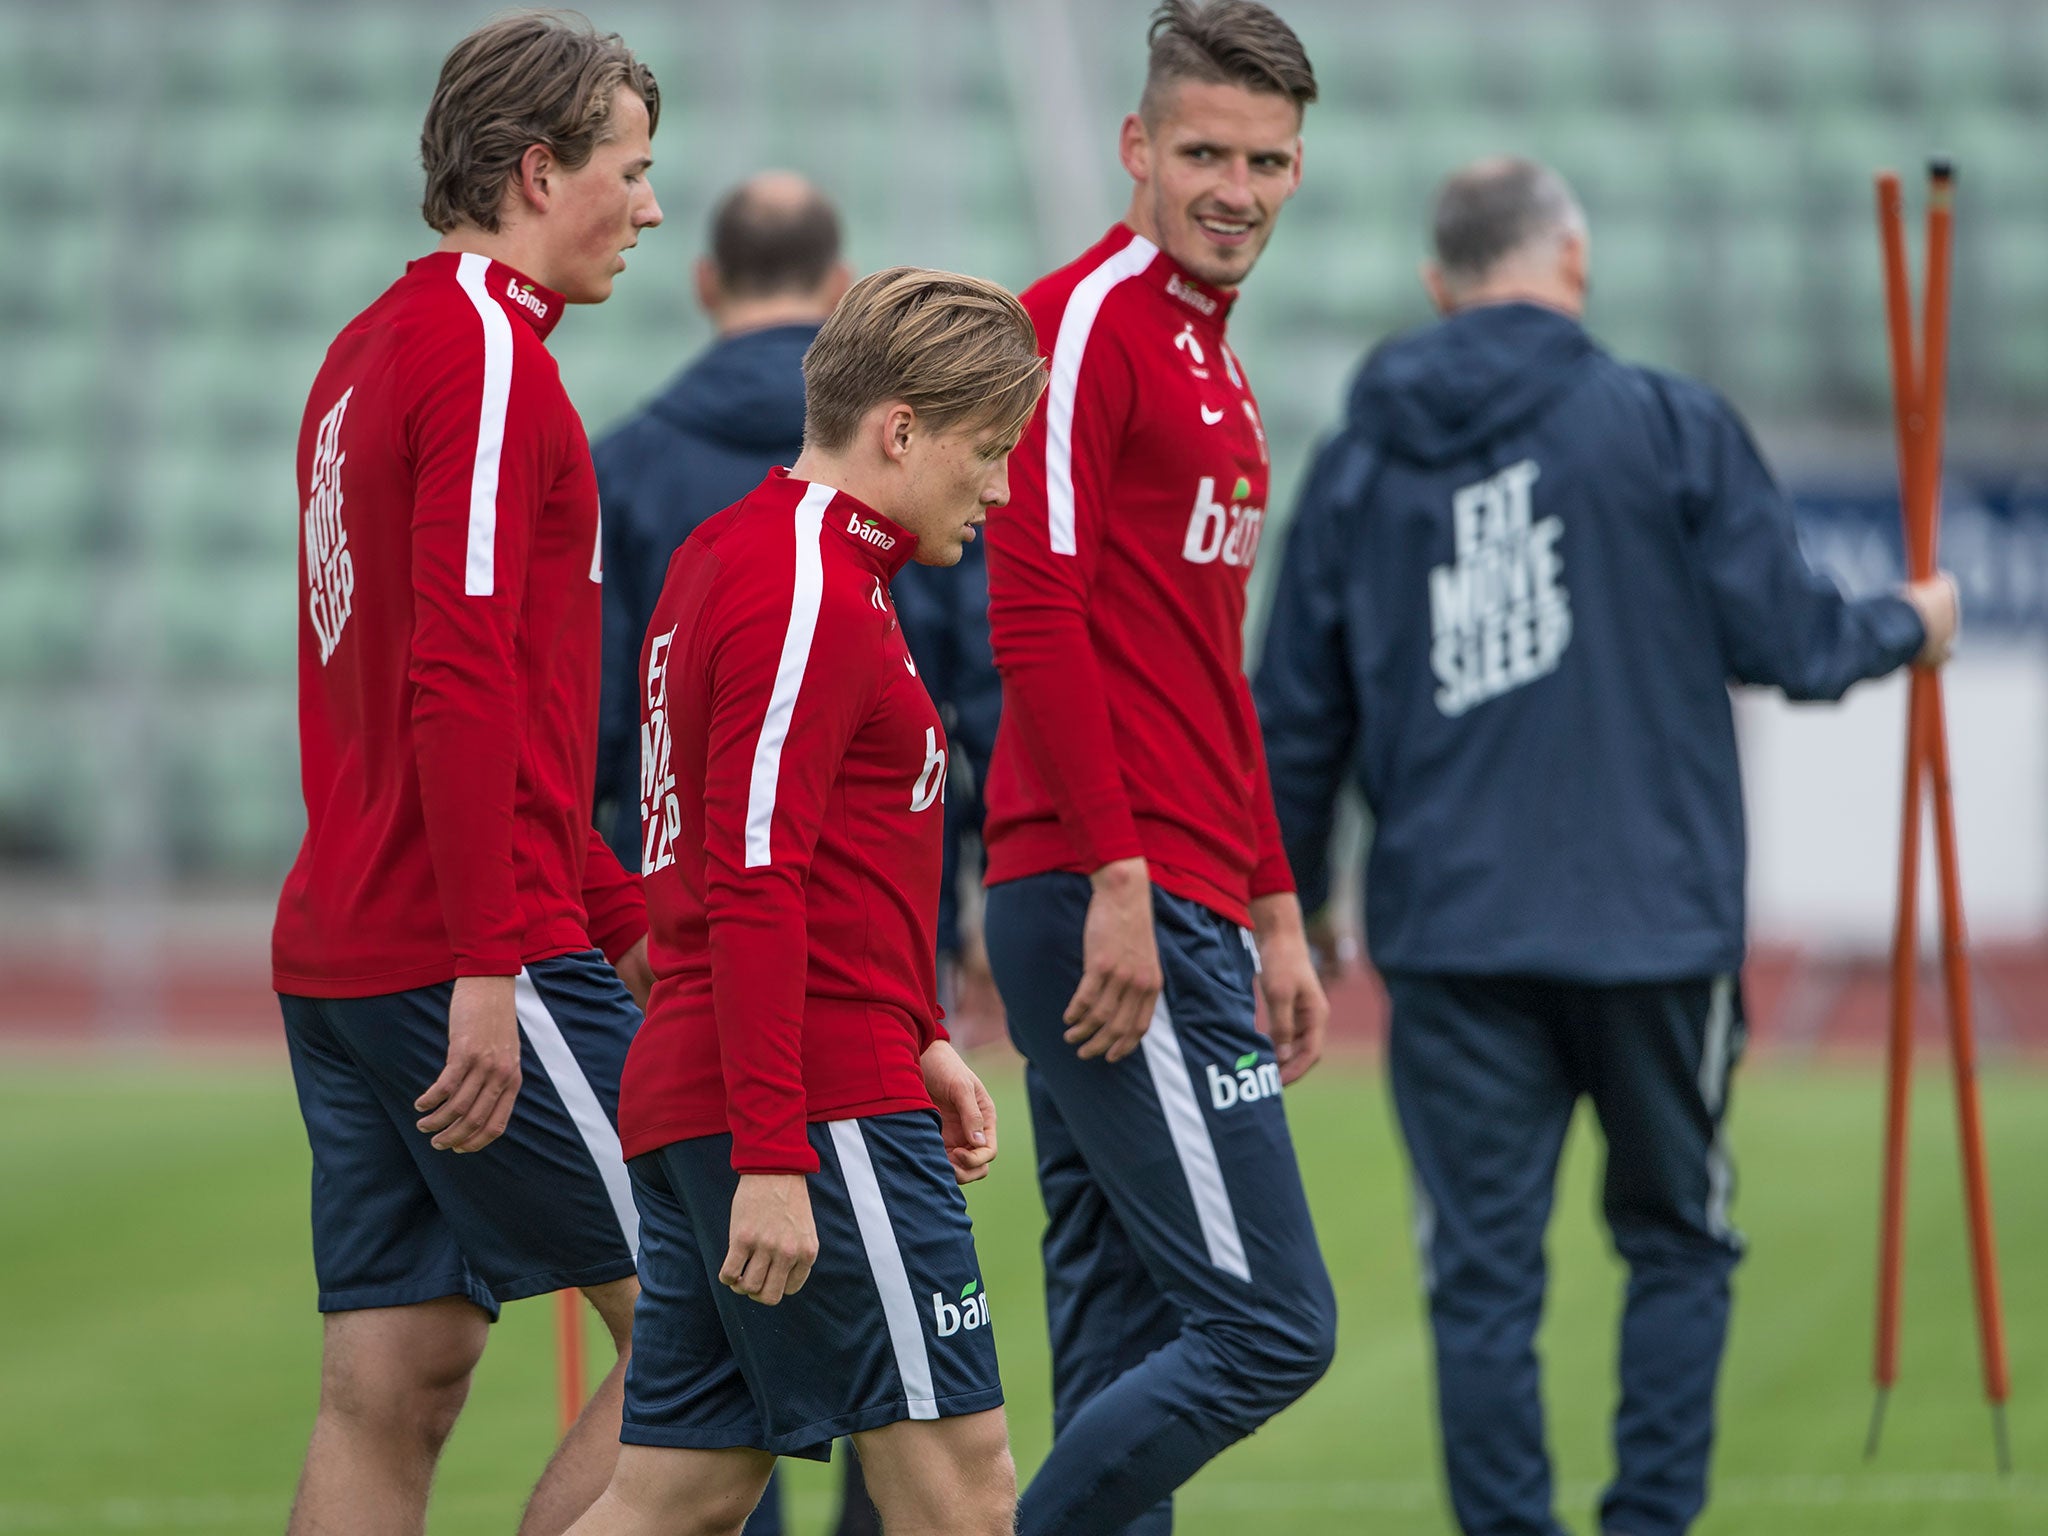 Norway's players in training